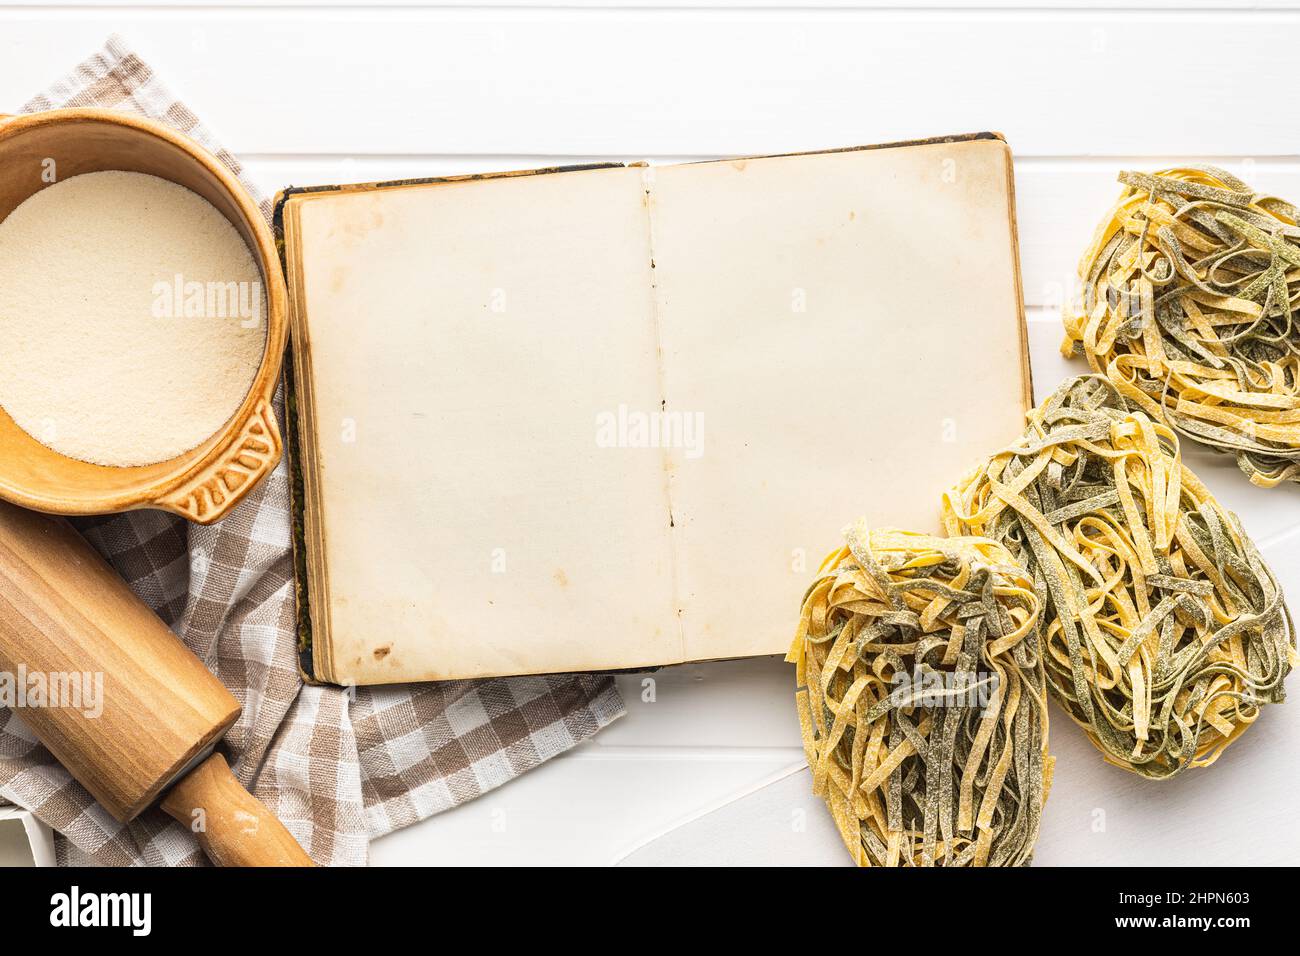 https://c8.alamy.com/comp/2HPN603/open-blank-cookbook-and-uncooked-noodles-pasta-antique-recipe-book-on-white-table-top-view-2HPN603.jpg